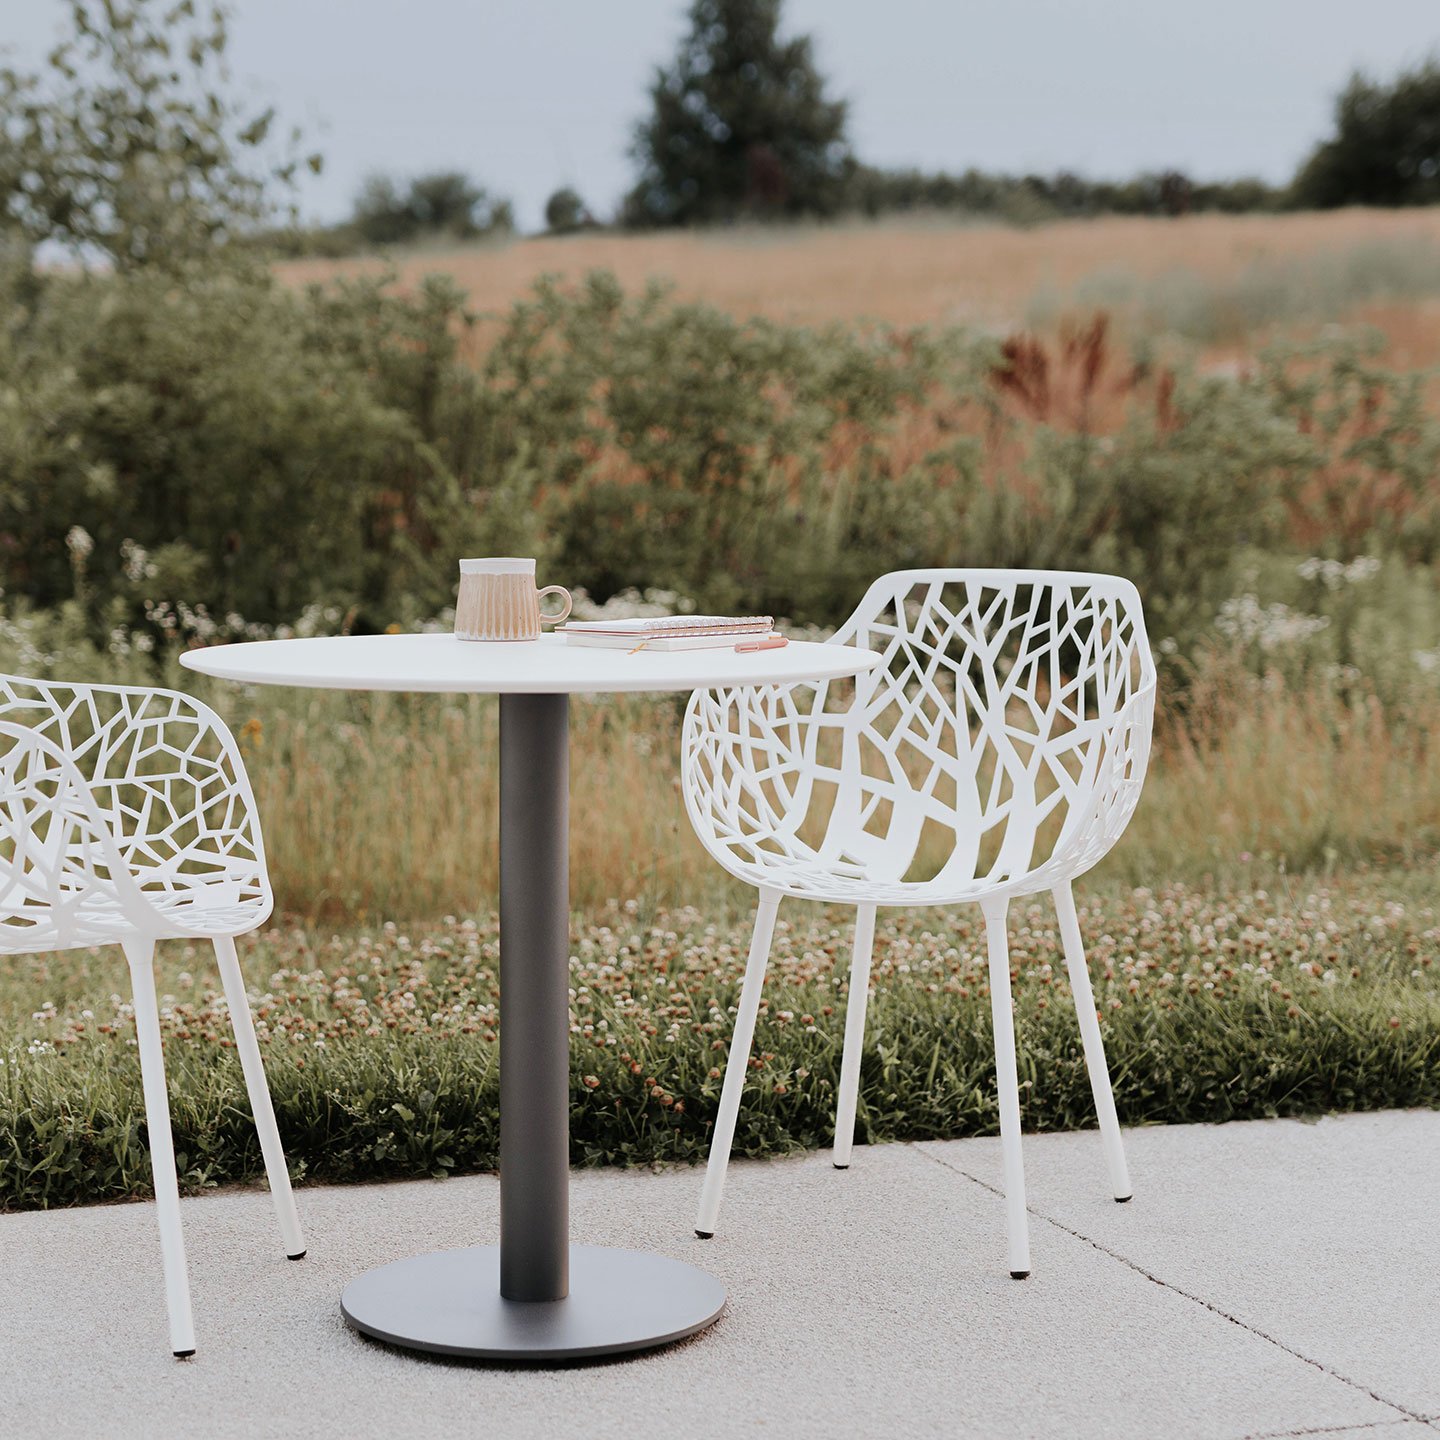 Kelder microscopisch lager See Haworth Collection's Forest Outdoor Chair and Stool | Haworth